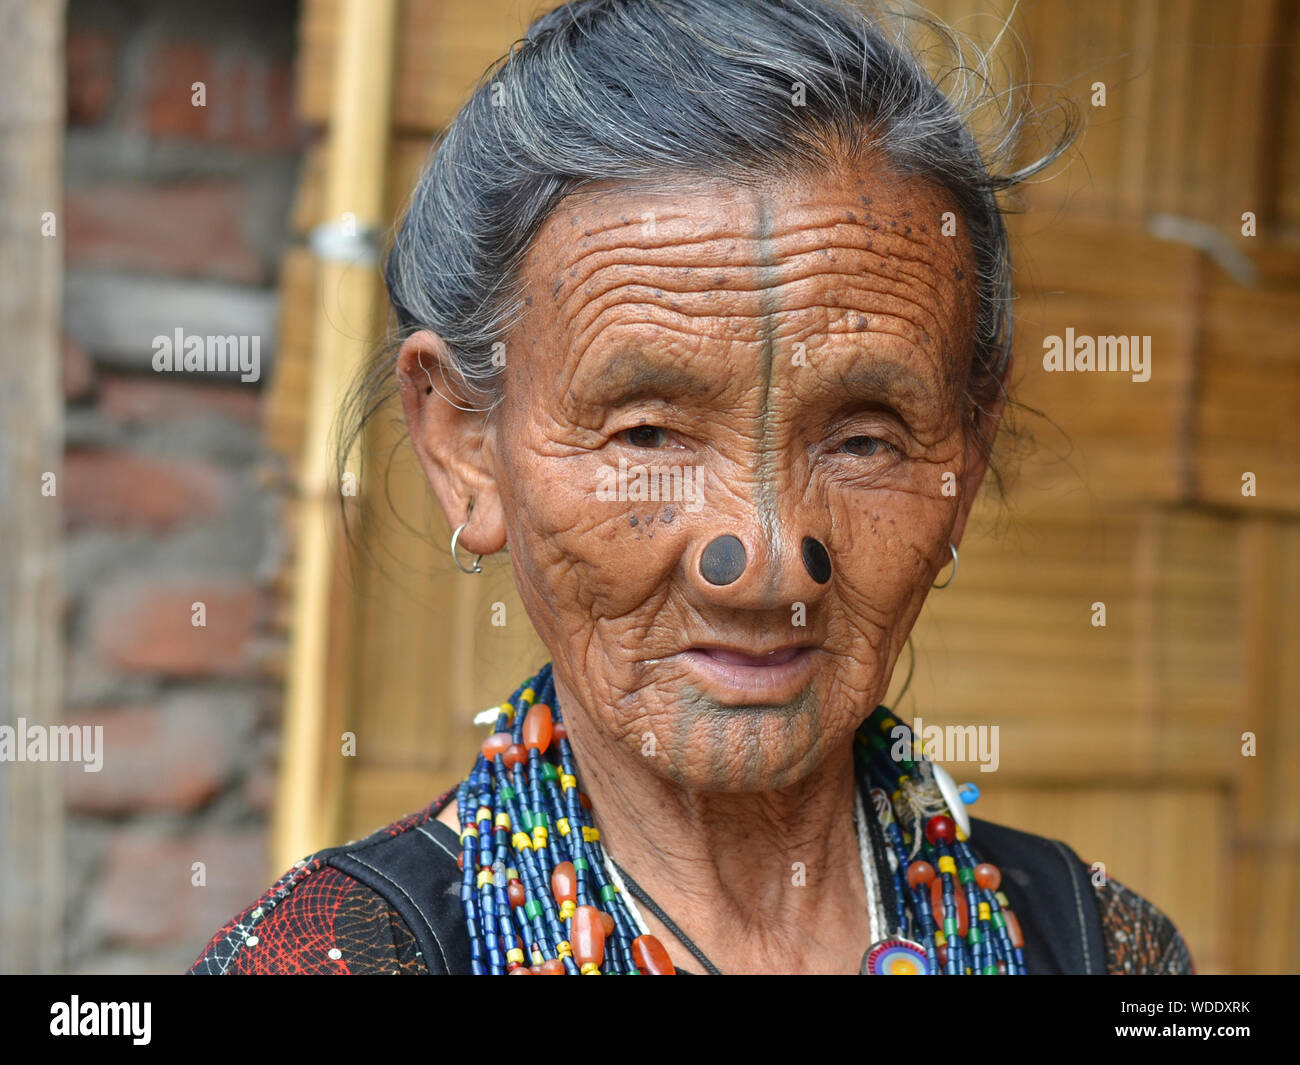 Old Indian Apatani woman with black wooden nose plugs (yawping hullo) and distinctive tribal face tattoo on forehead and chin poses for the camera. Stock Photo